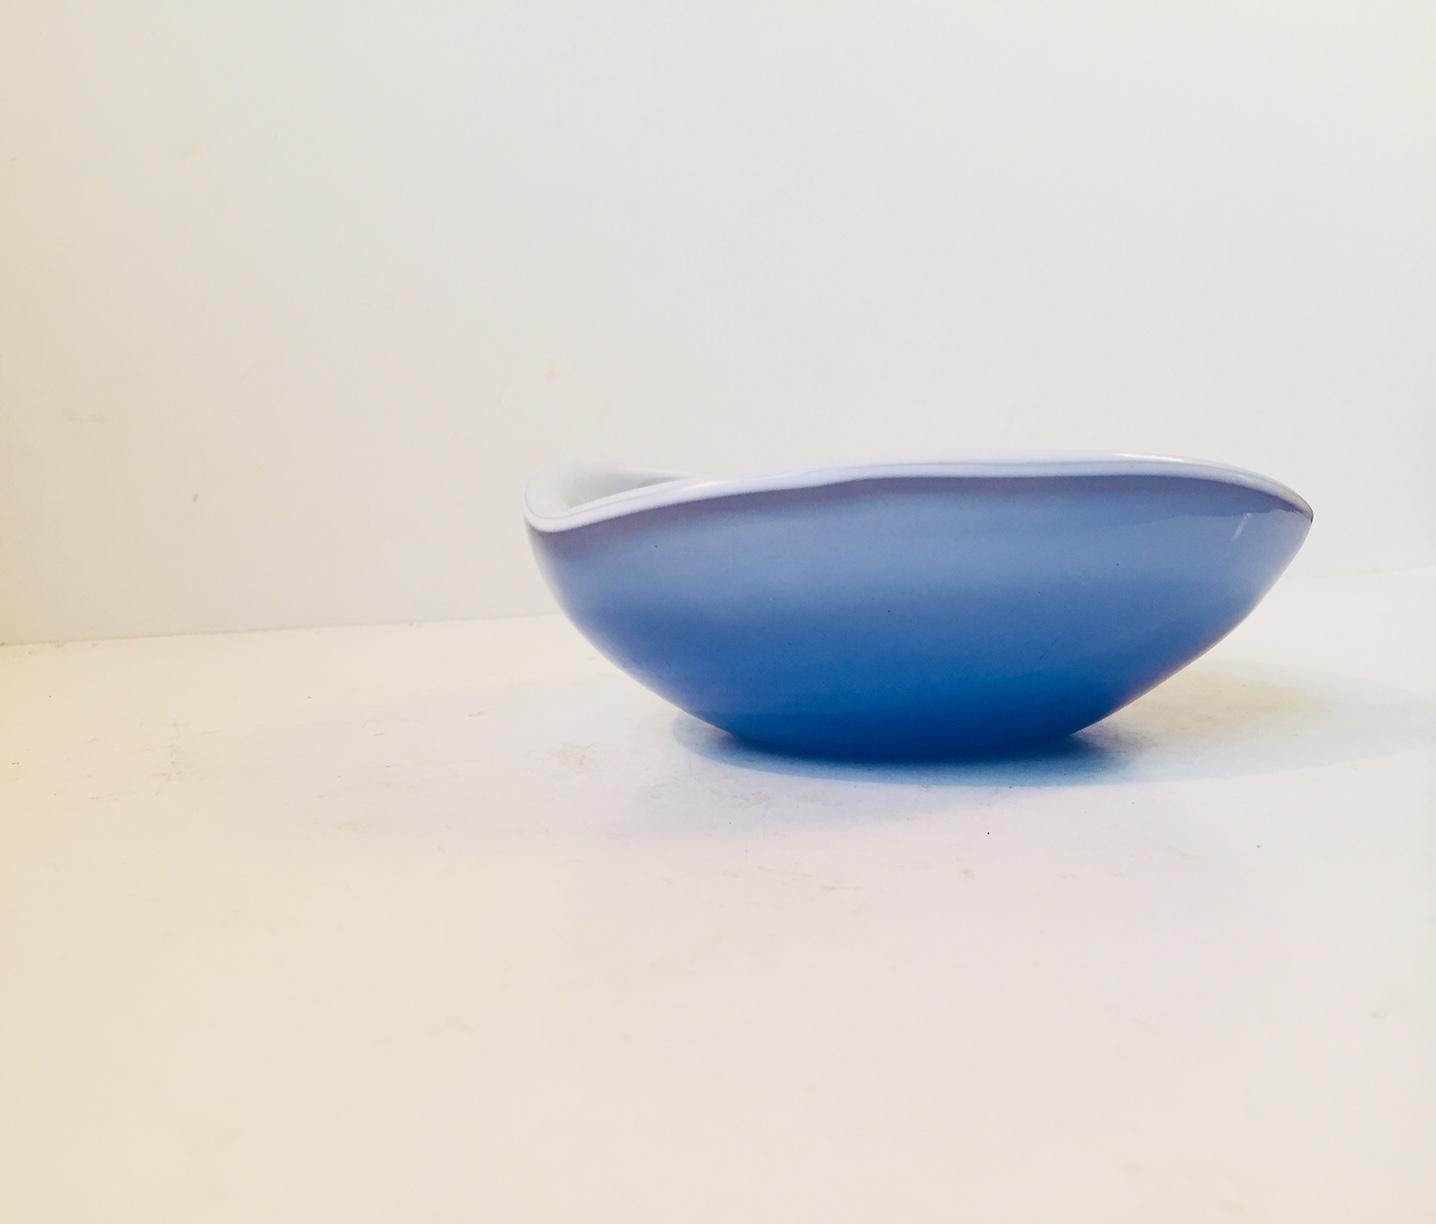 - Decorative bowl or ashtray
- Composed of a cased baby blue glass exterior and an interior in opaline glass
- Made by Cenedese Vetri
- Produced in Murano, Italy during the late 1950s - early 1960s.